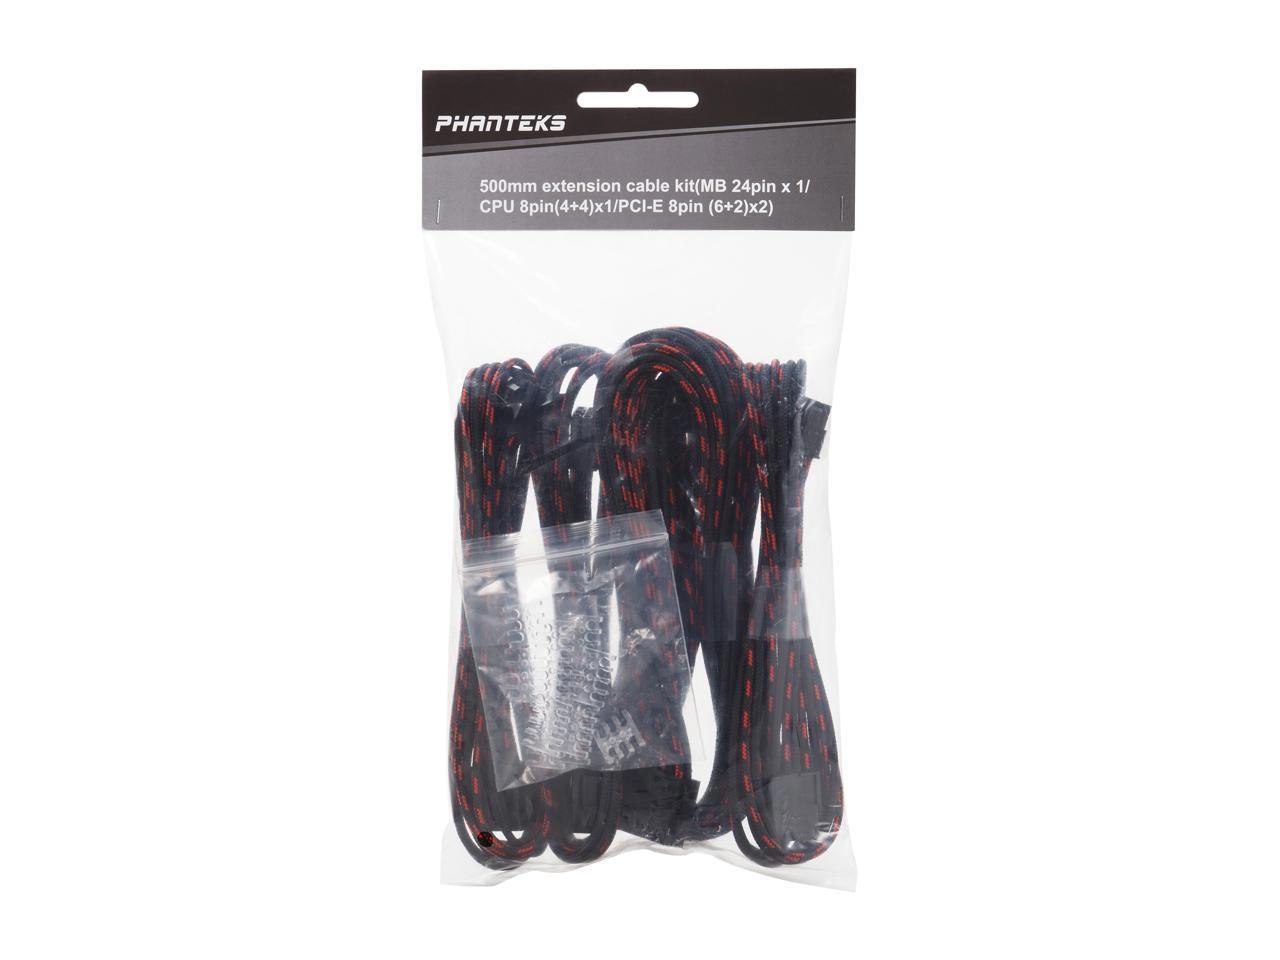 Phanteks Ph-Cb-Cmbo_Srd 1.64 FT. (0.50M) Sleeved Extension Cables For Vga And Motherboard.